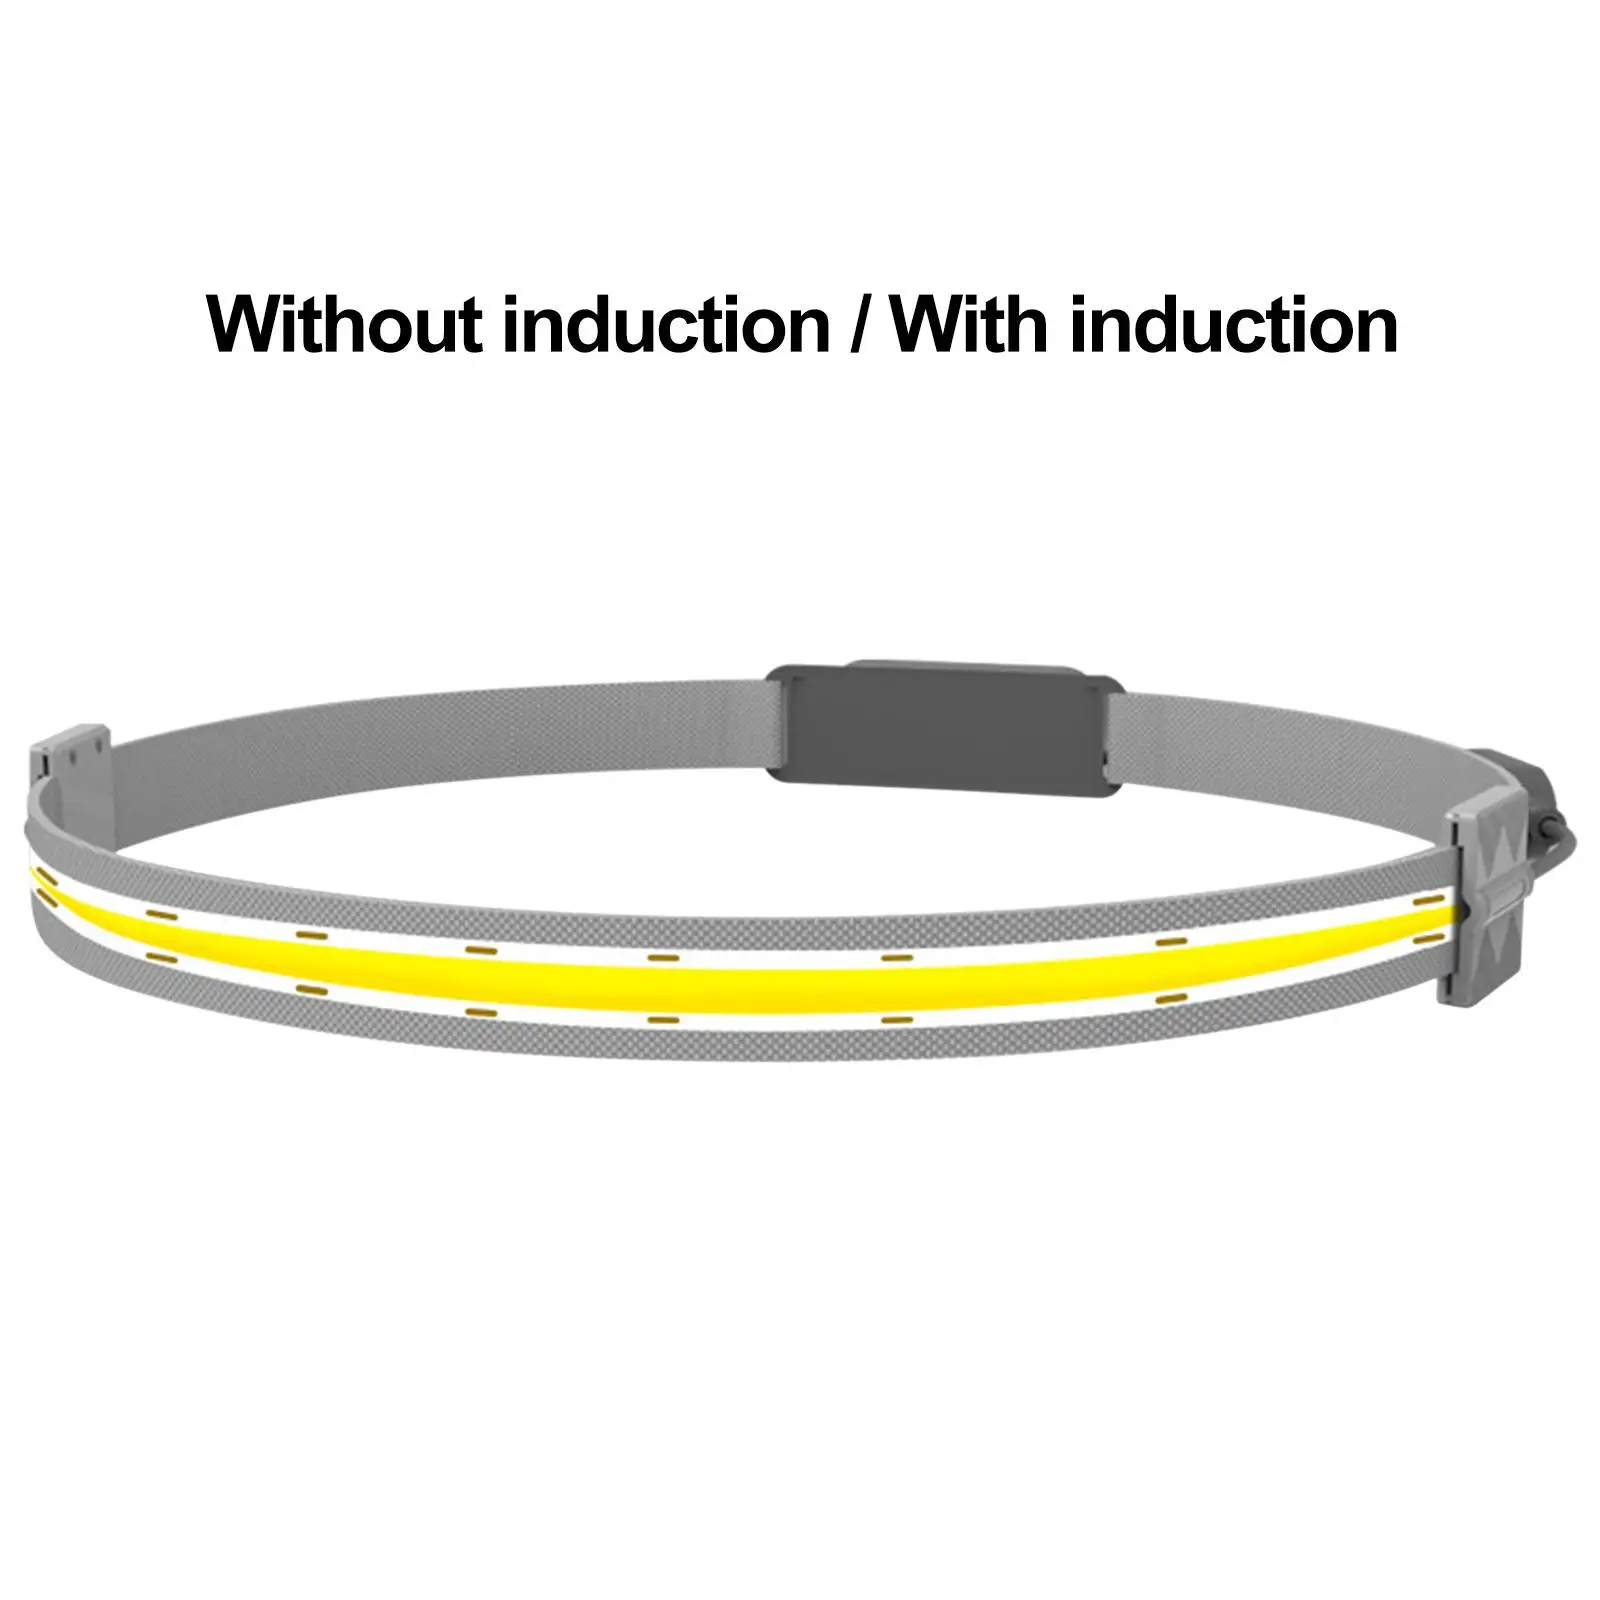 LED Headlamp Beam 3 Modes Bright USB Rechargeable Emergency Light Floodlight Lamp for Running Fishing Cycling Camping Climbing